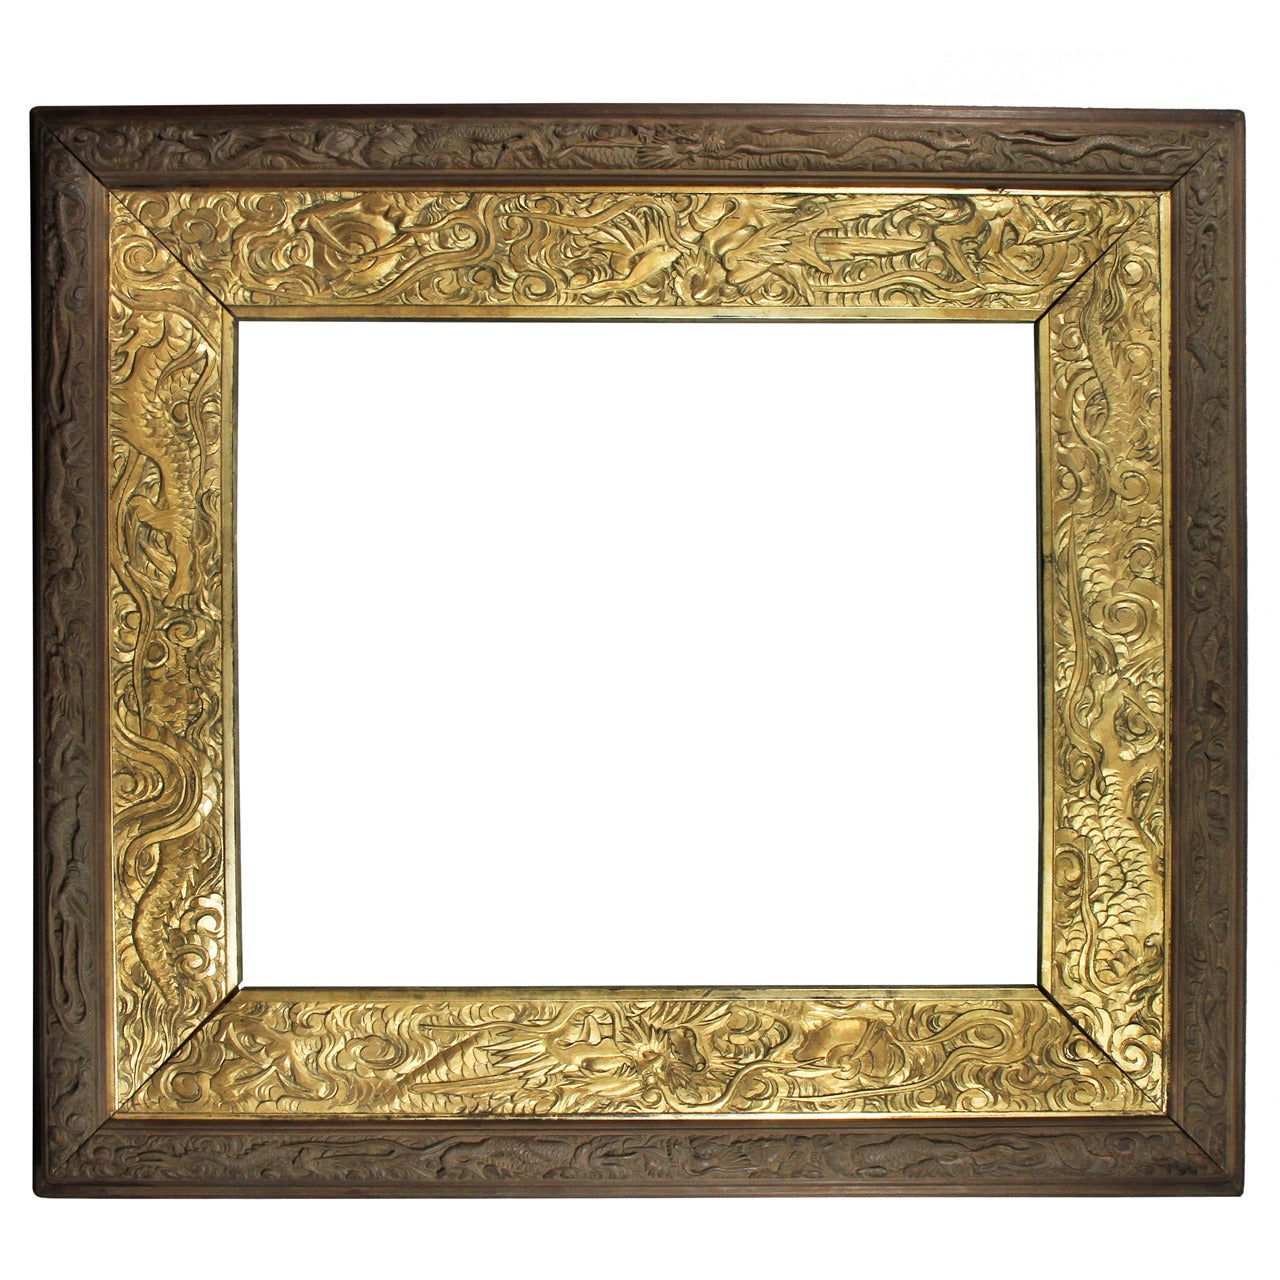 Unusual Japanese Carved Wood And Gilded Frame